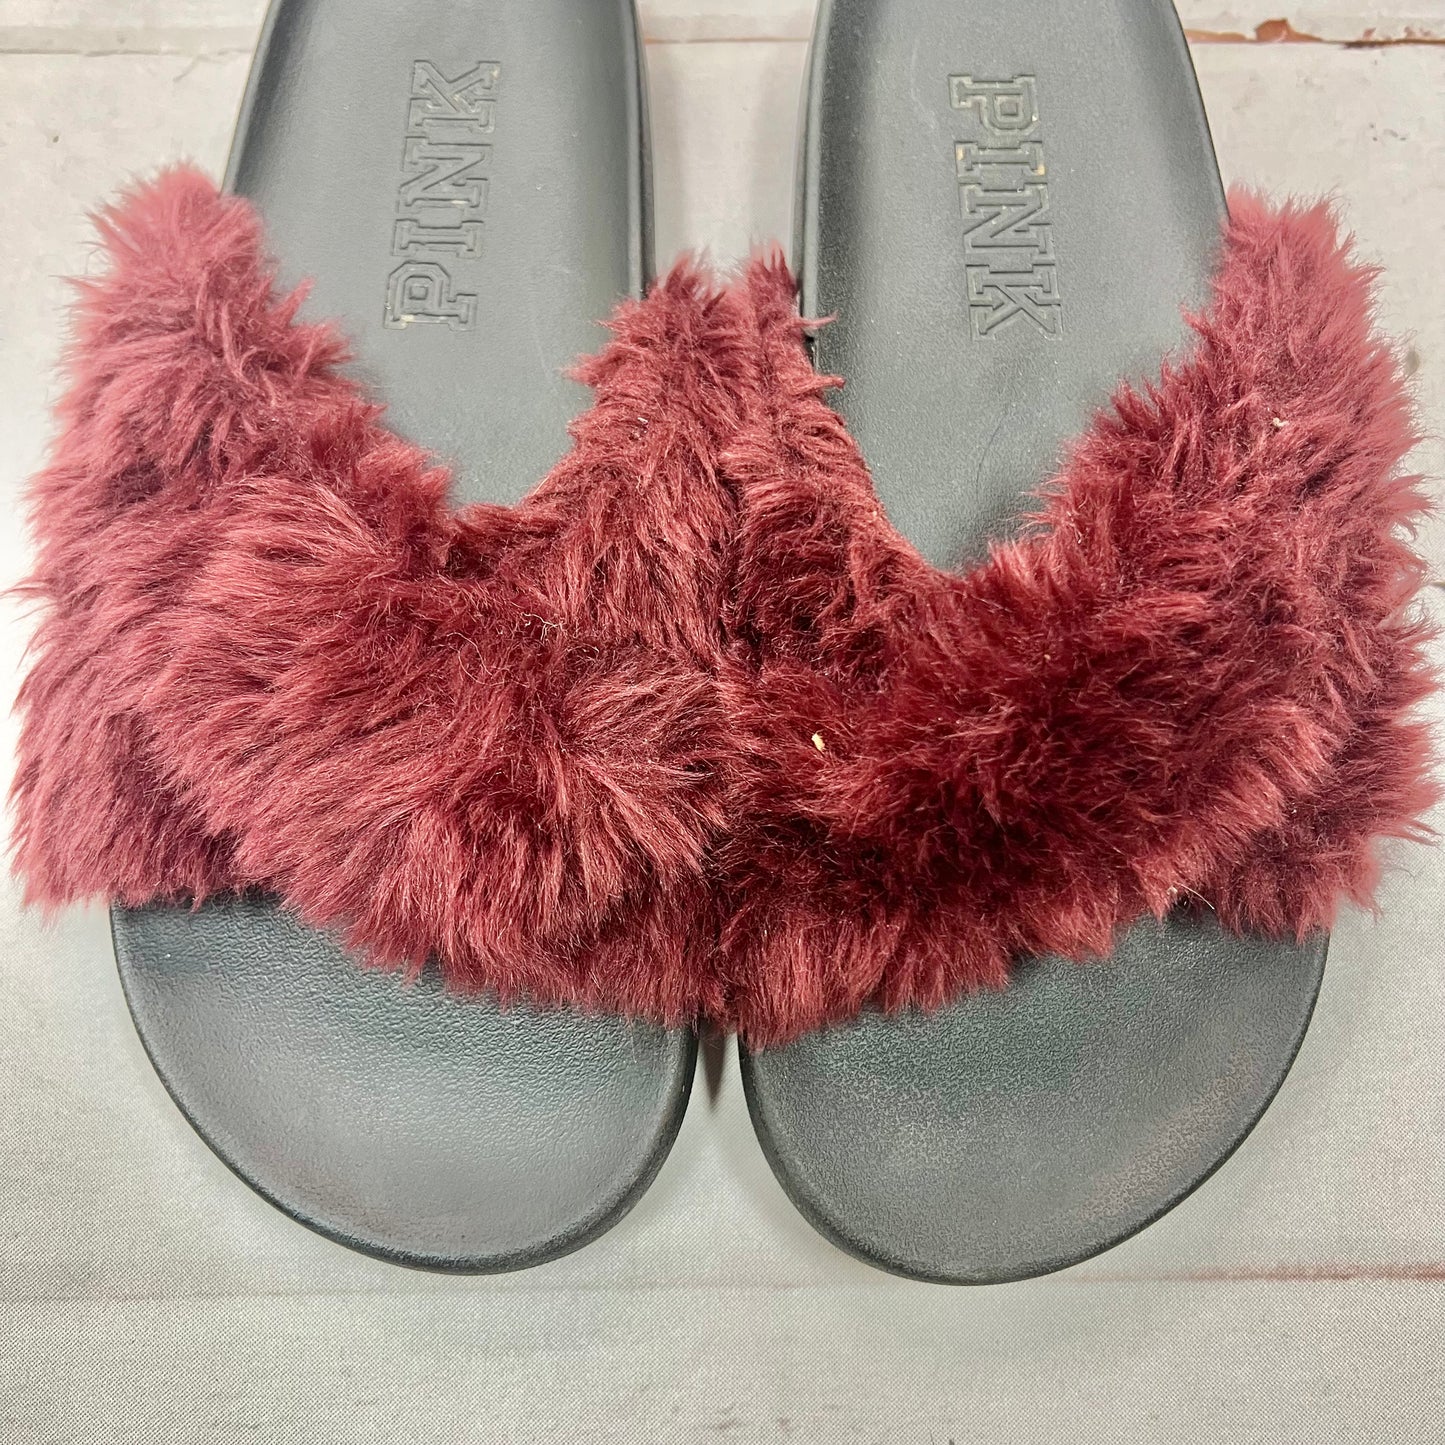 Shoes Flats Mule & Slide By Pink  Size: 8